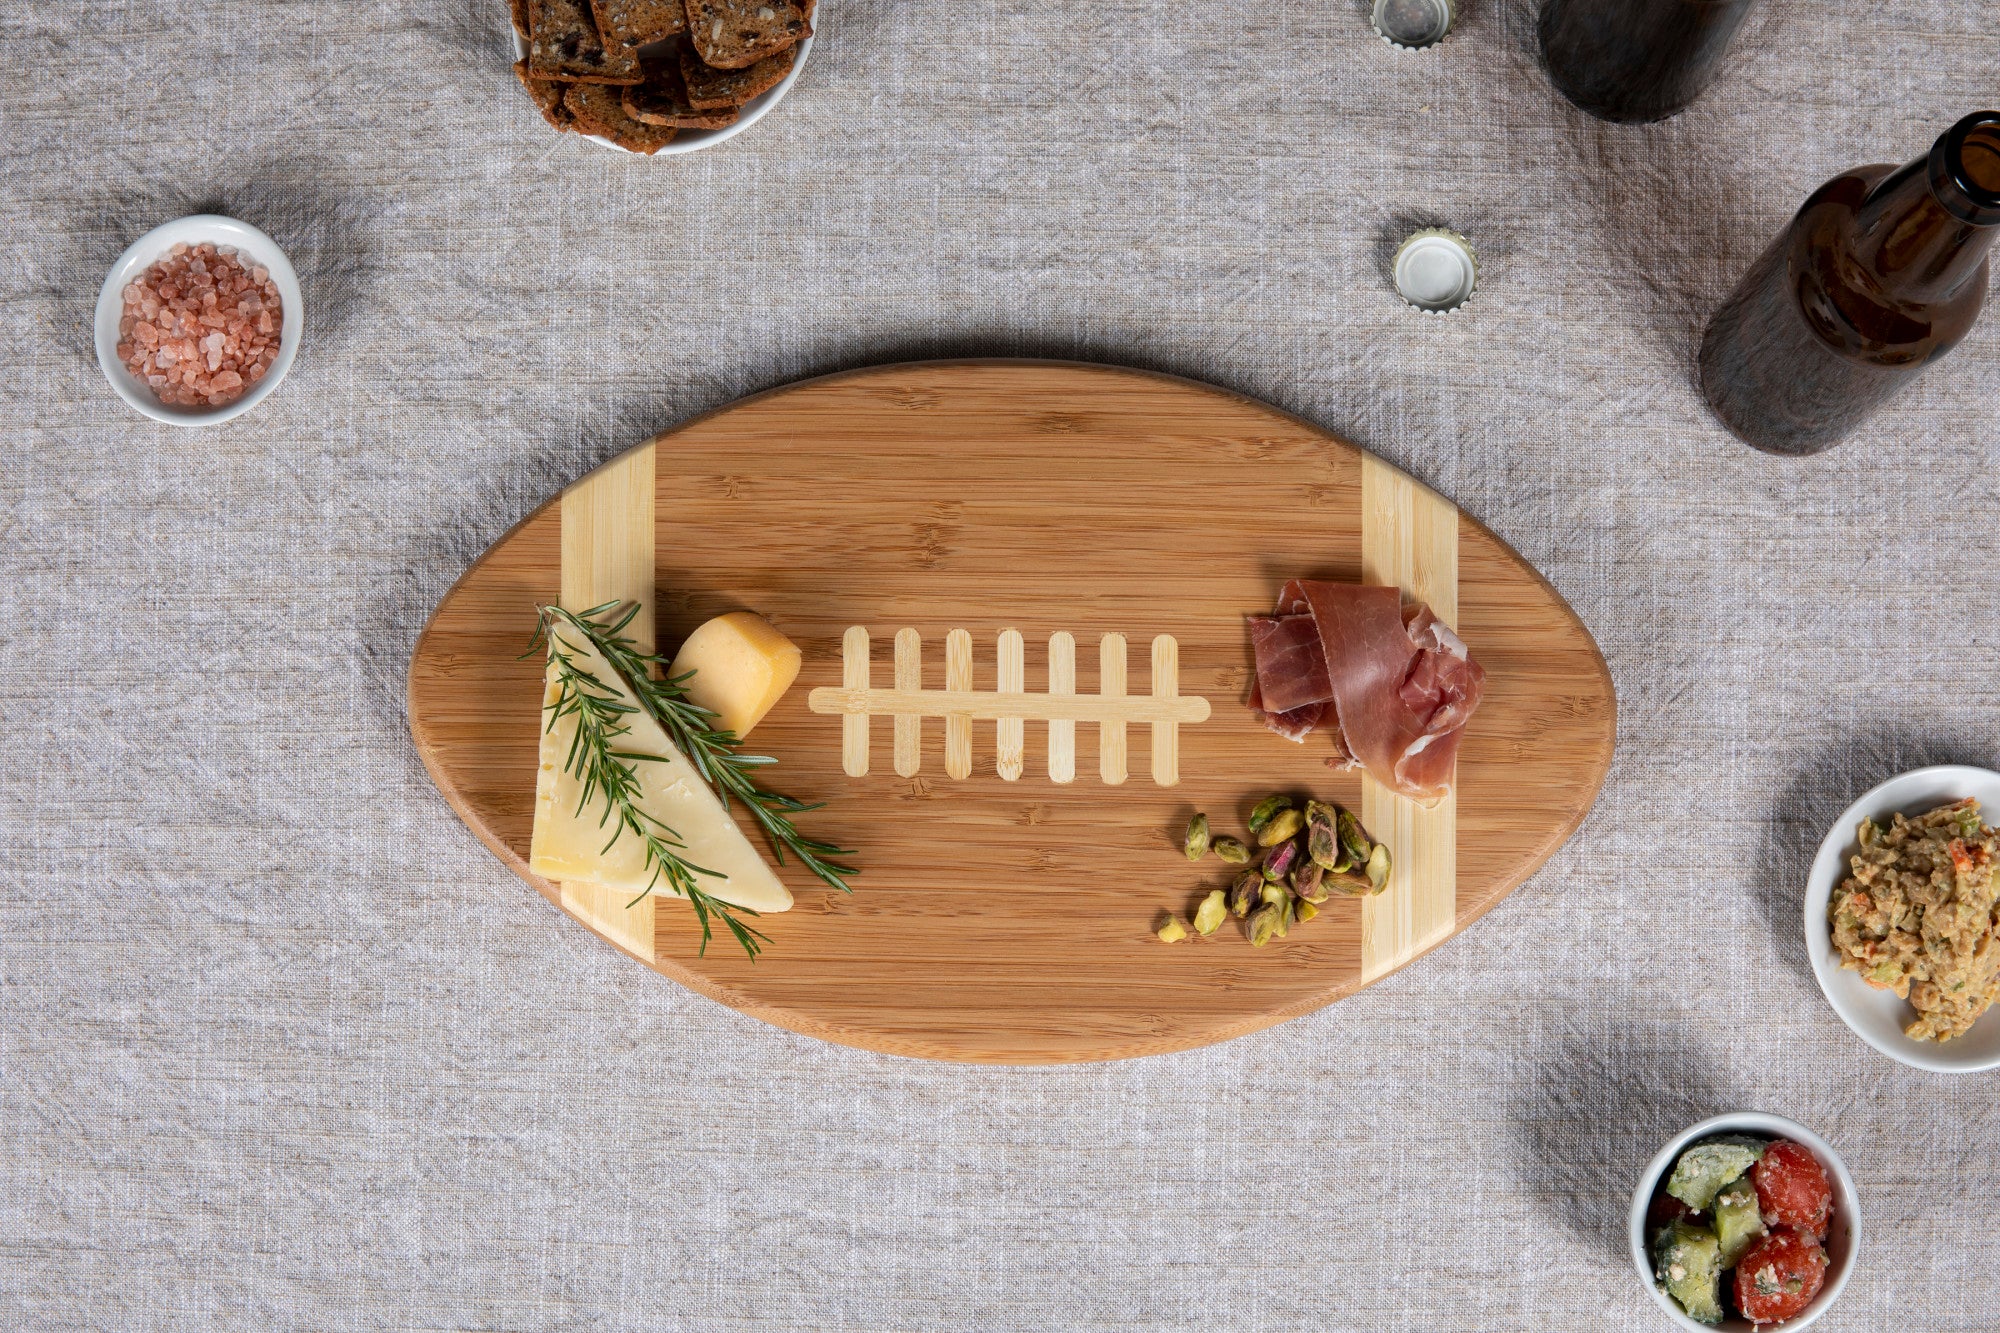 Wake Forest Demon Deacons - Touchdown! Football Cutting Board & Serving Tray